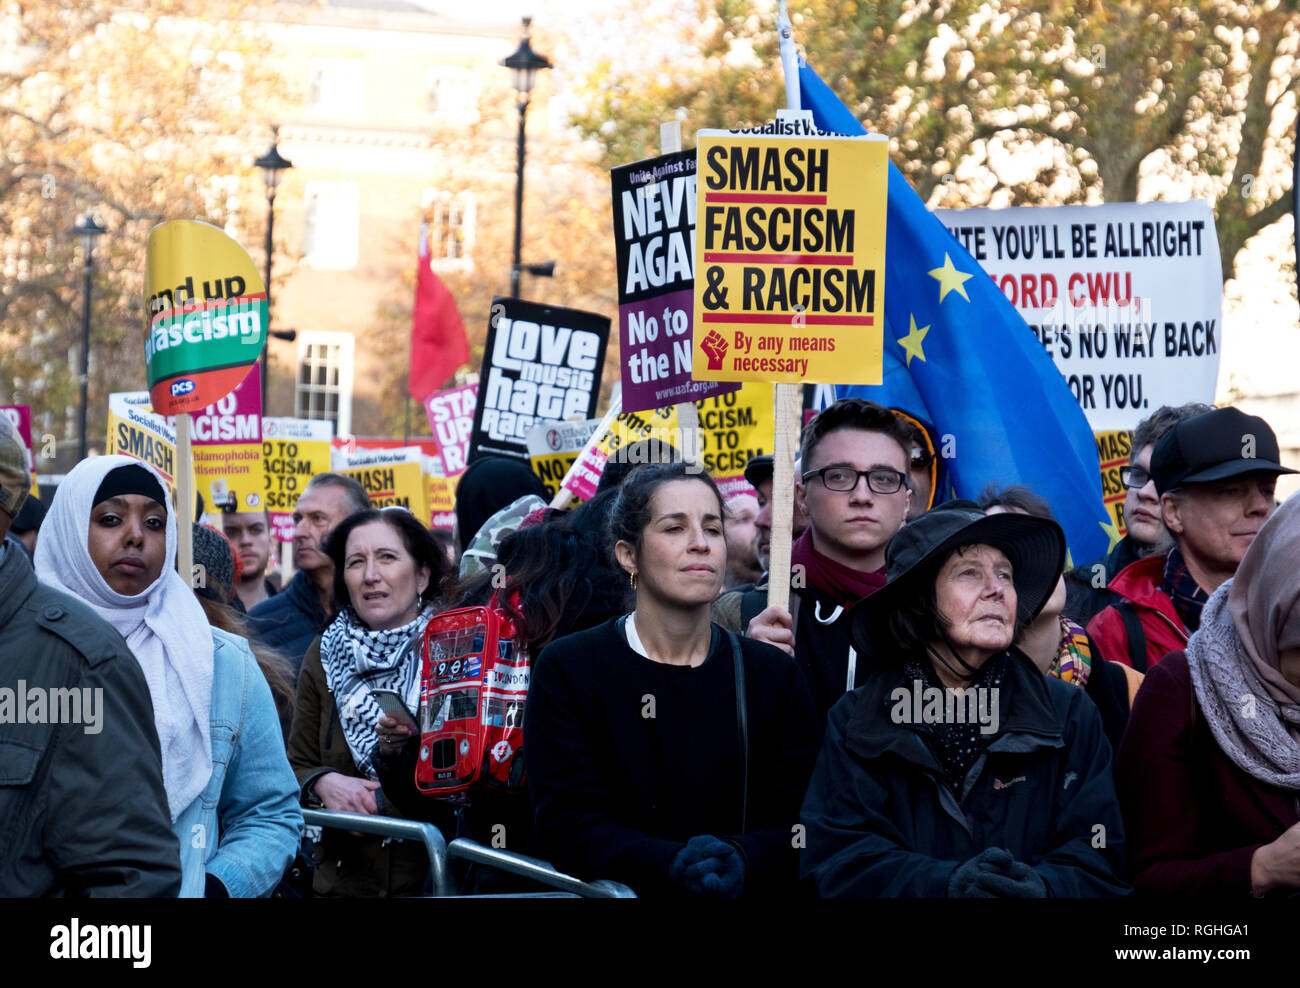 Anti-racism Anti-Fascism march and protest through central London on 17 Nov 2018 Stock Photo